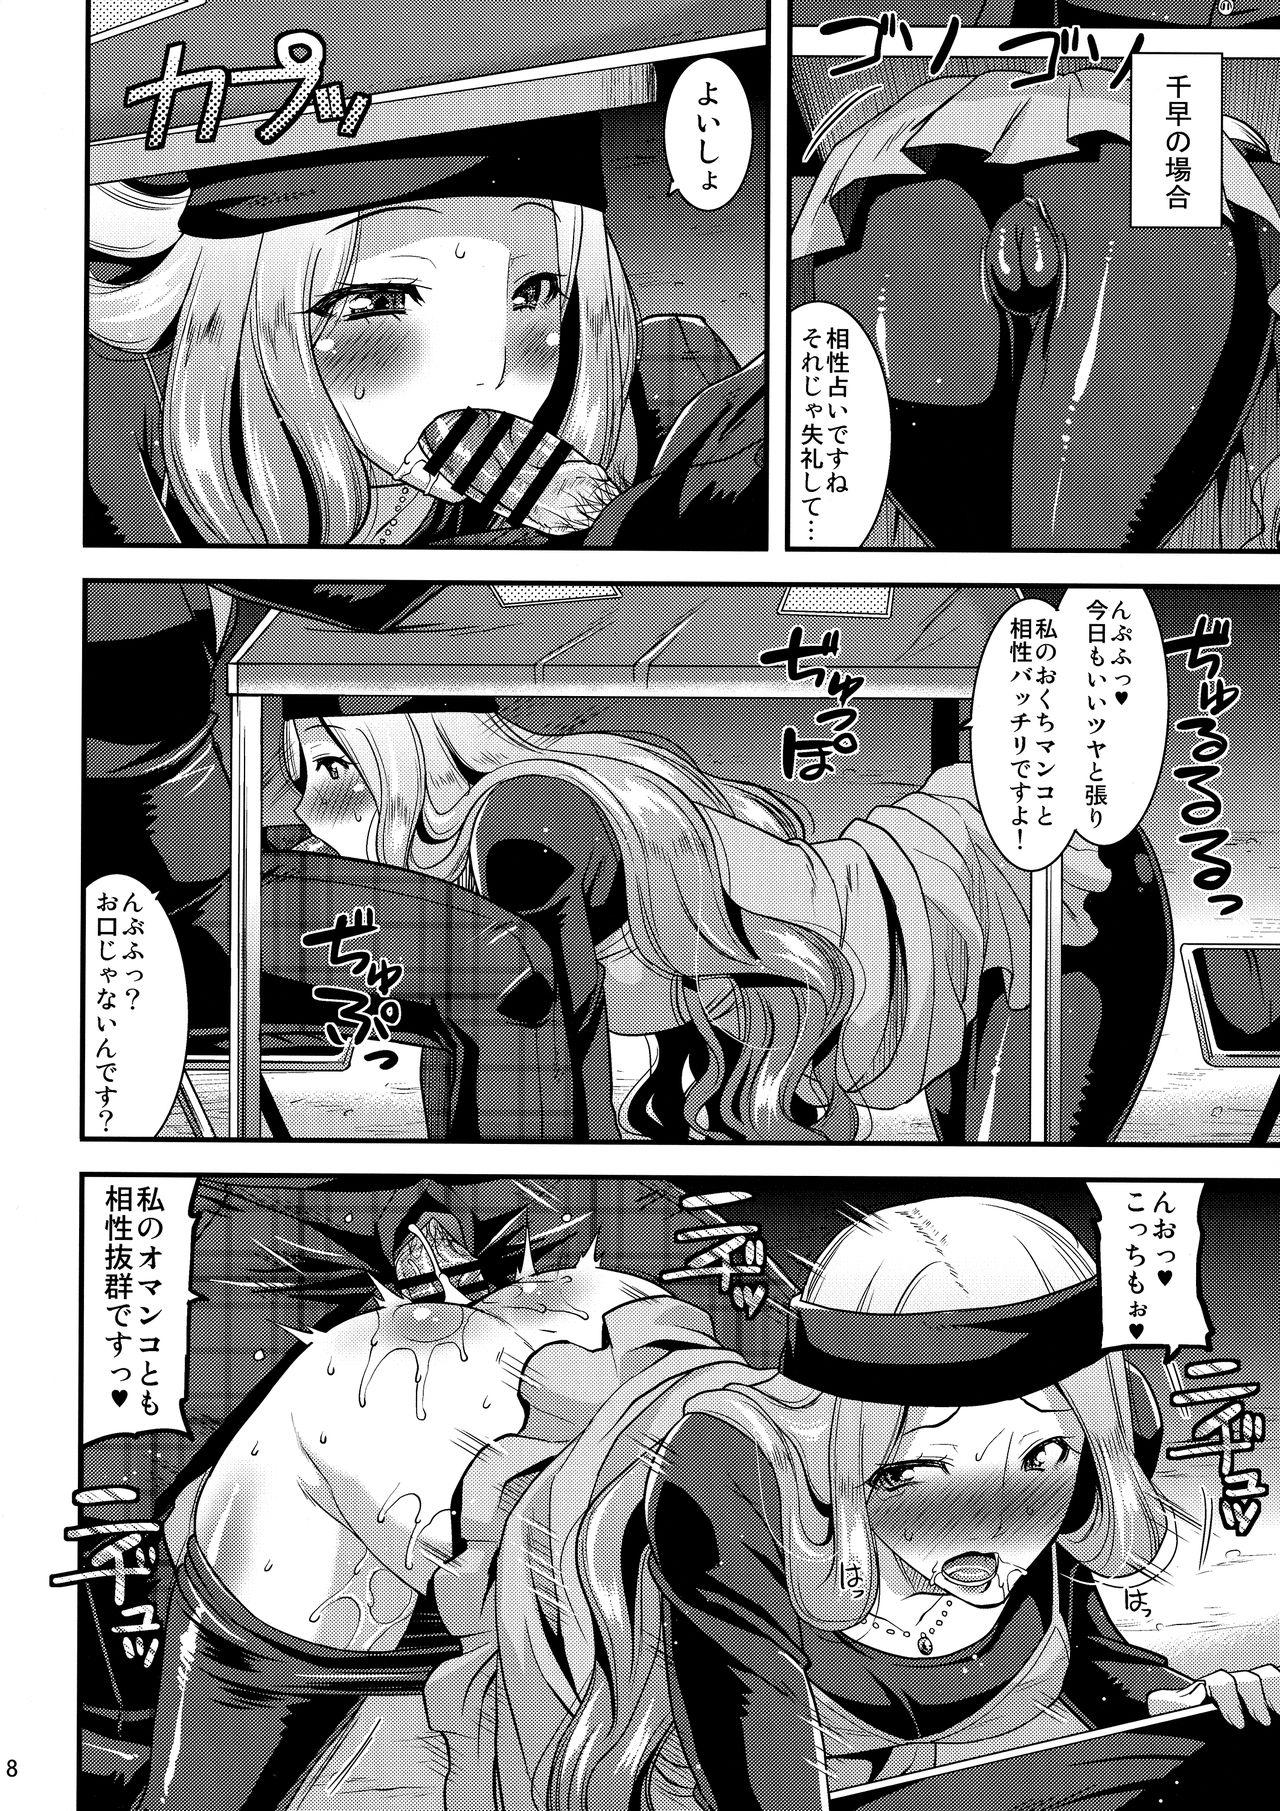 Teen Fuck LET US START THE SEX - Persona 5 Foot Fetish - Page 7